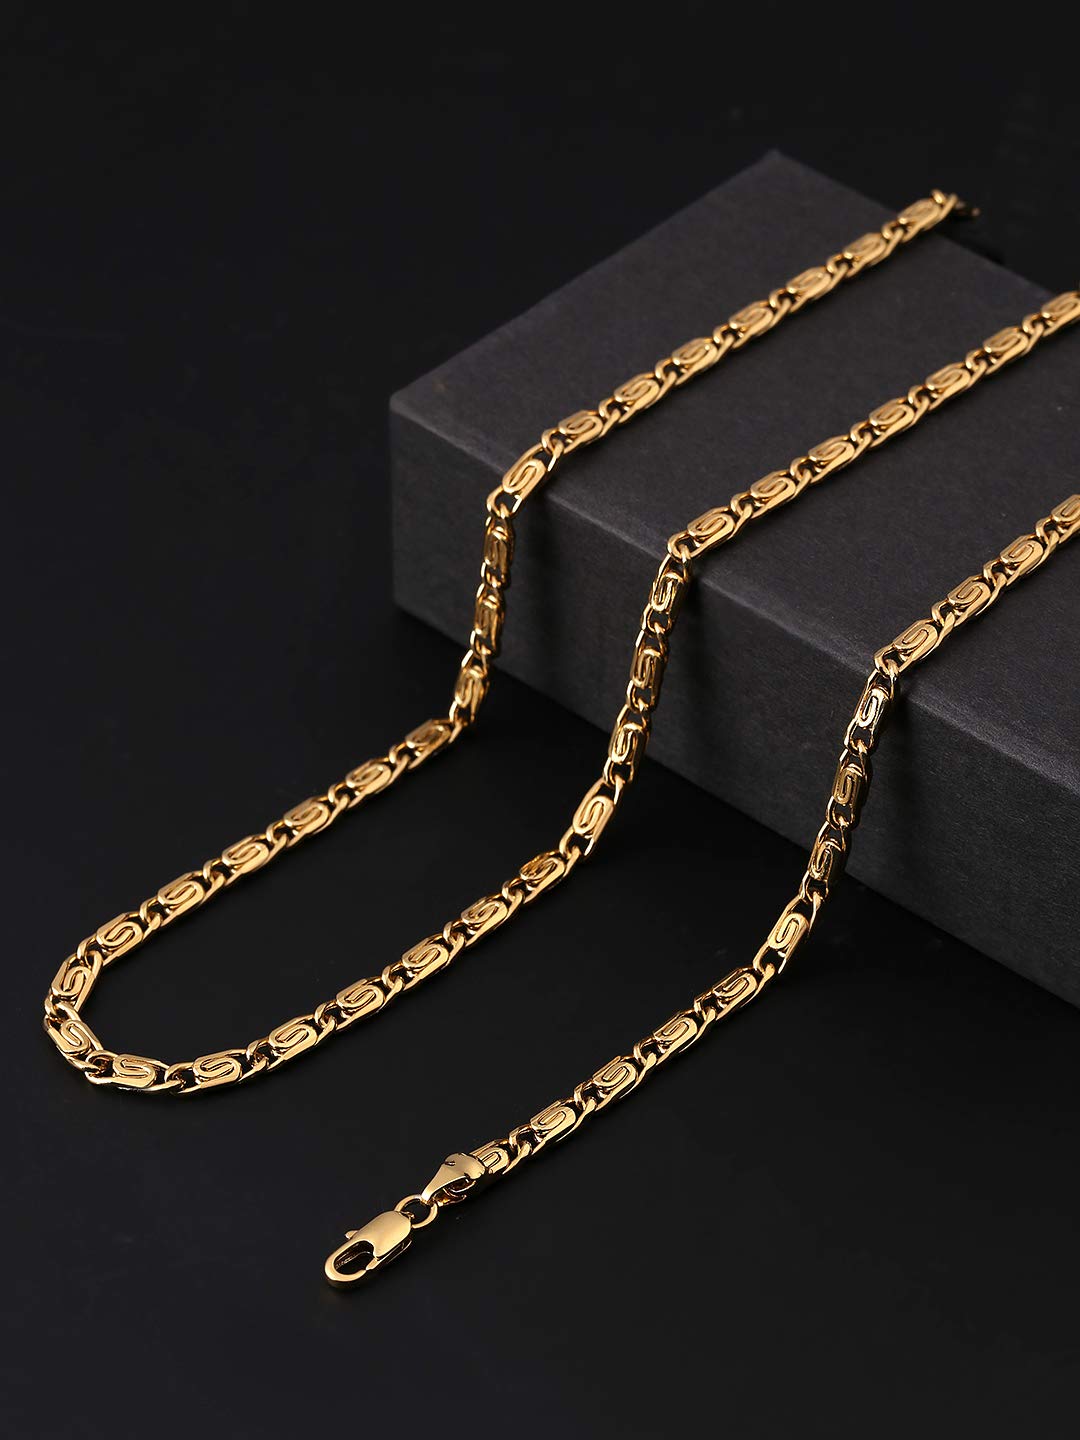 Yellow Chimes Chain for Men Golden Chain for Boys 316L Stainless Steel Spiral Figaro Interlinked Neck Chain for Men and Boys